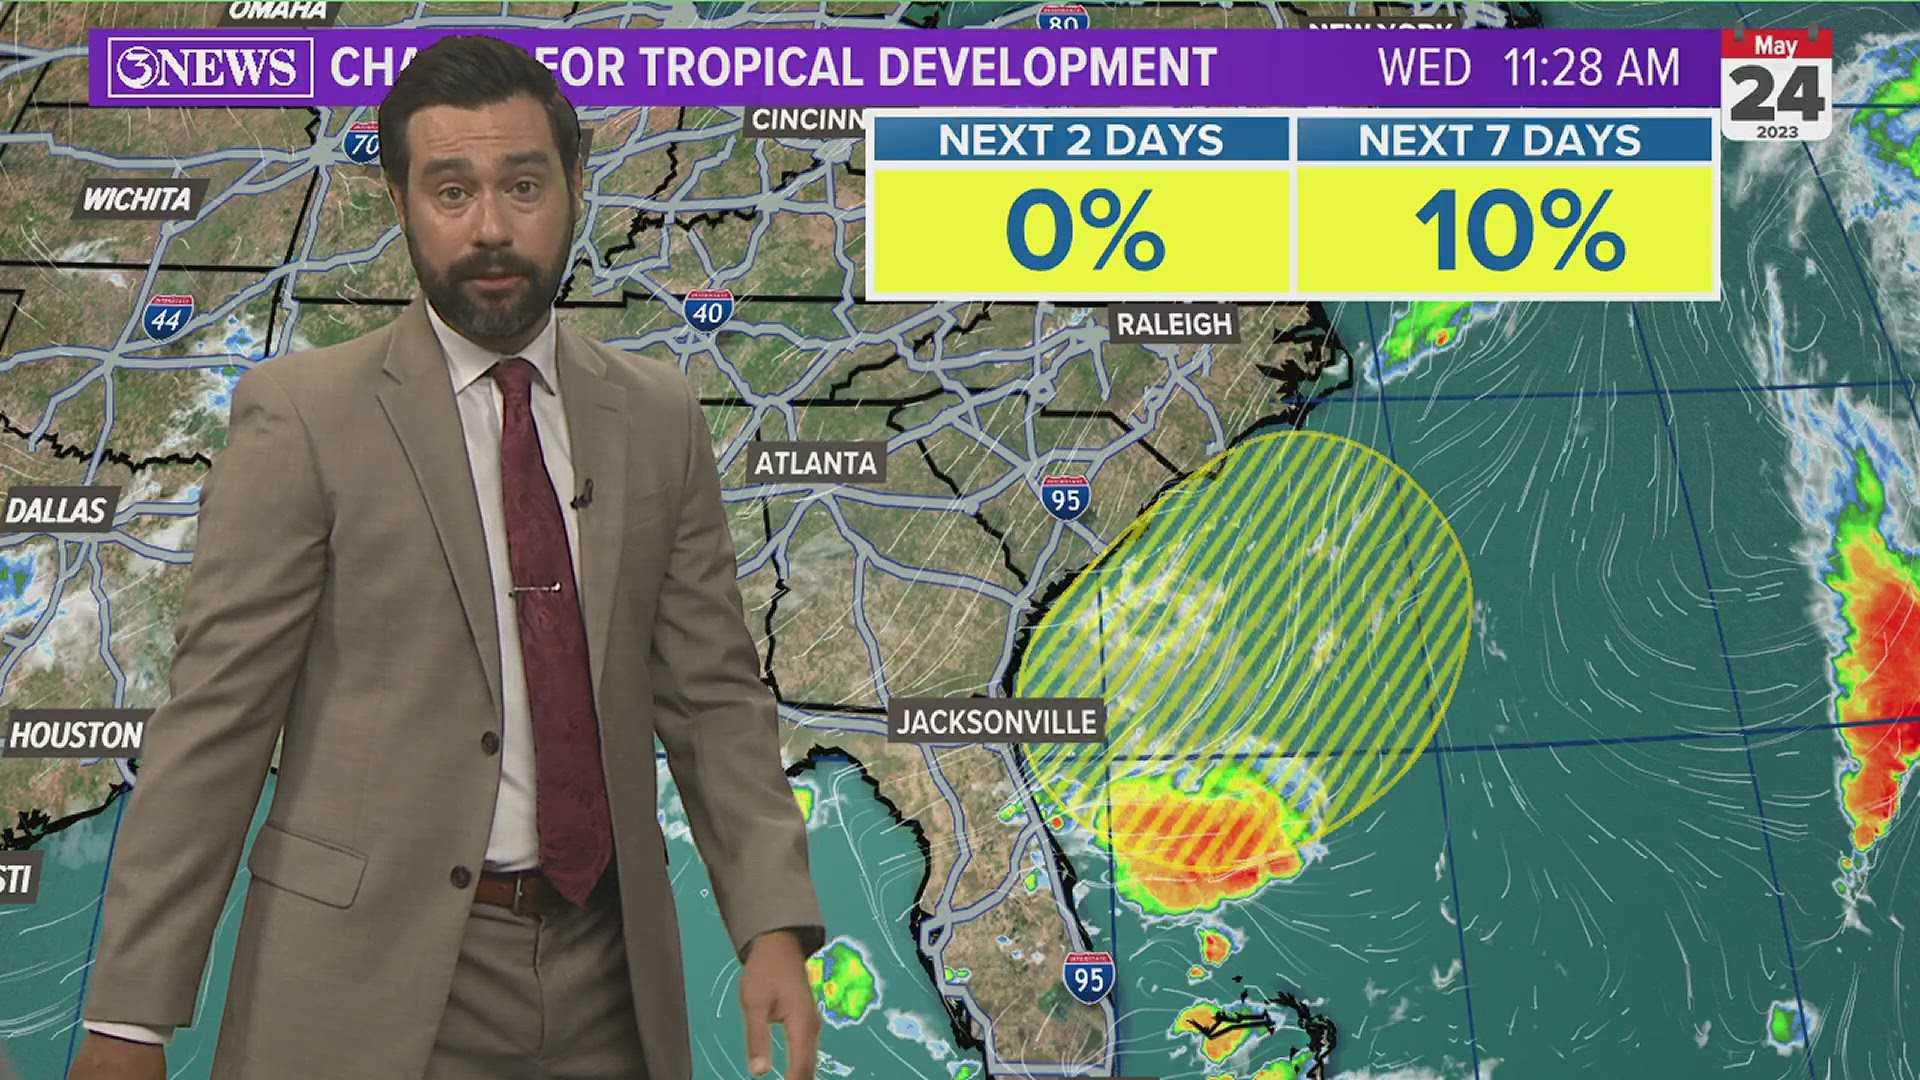 There is a low (10%) chance for tropical development near the Carolinas over Memorial Day Weekend